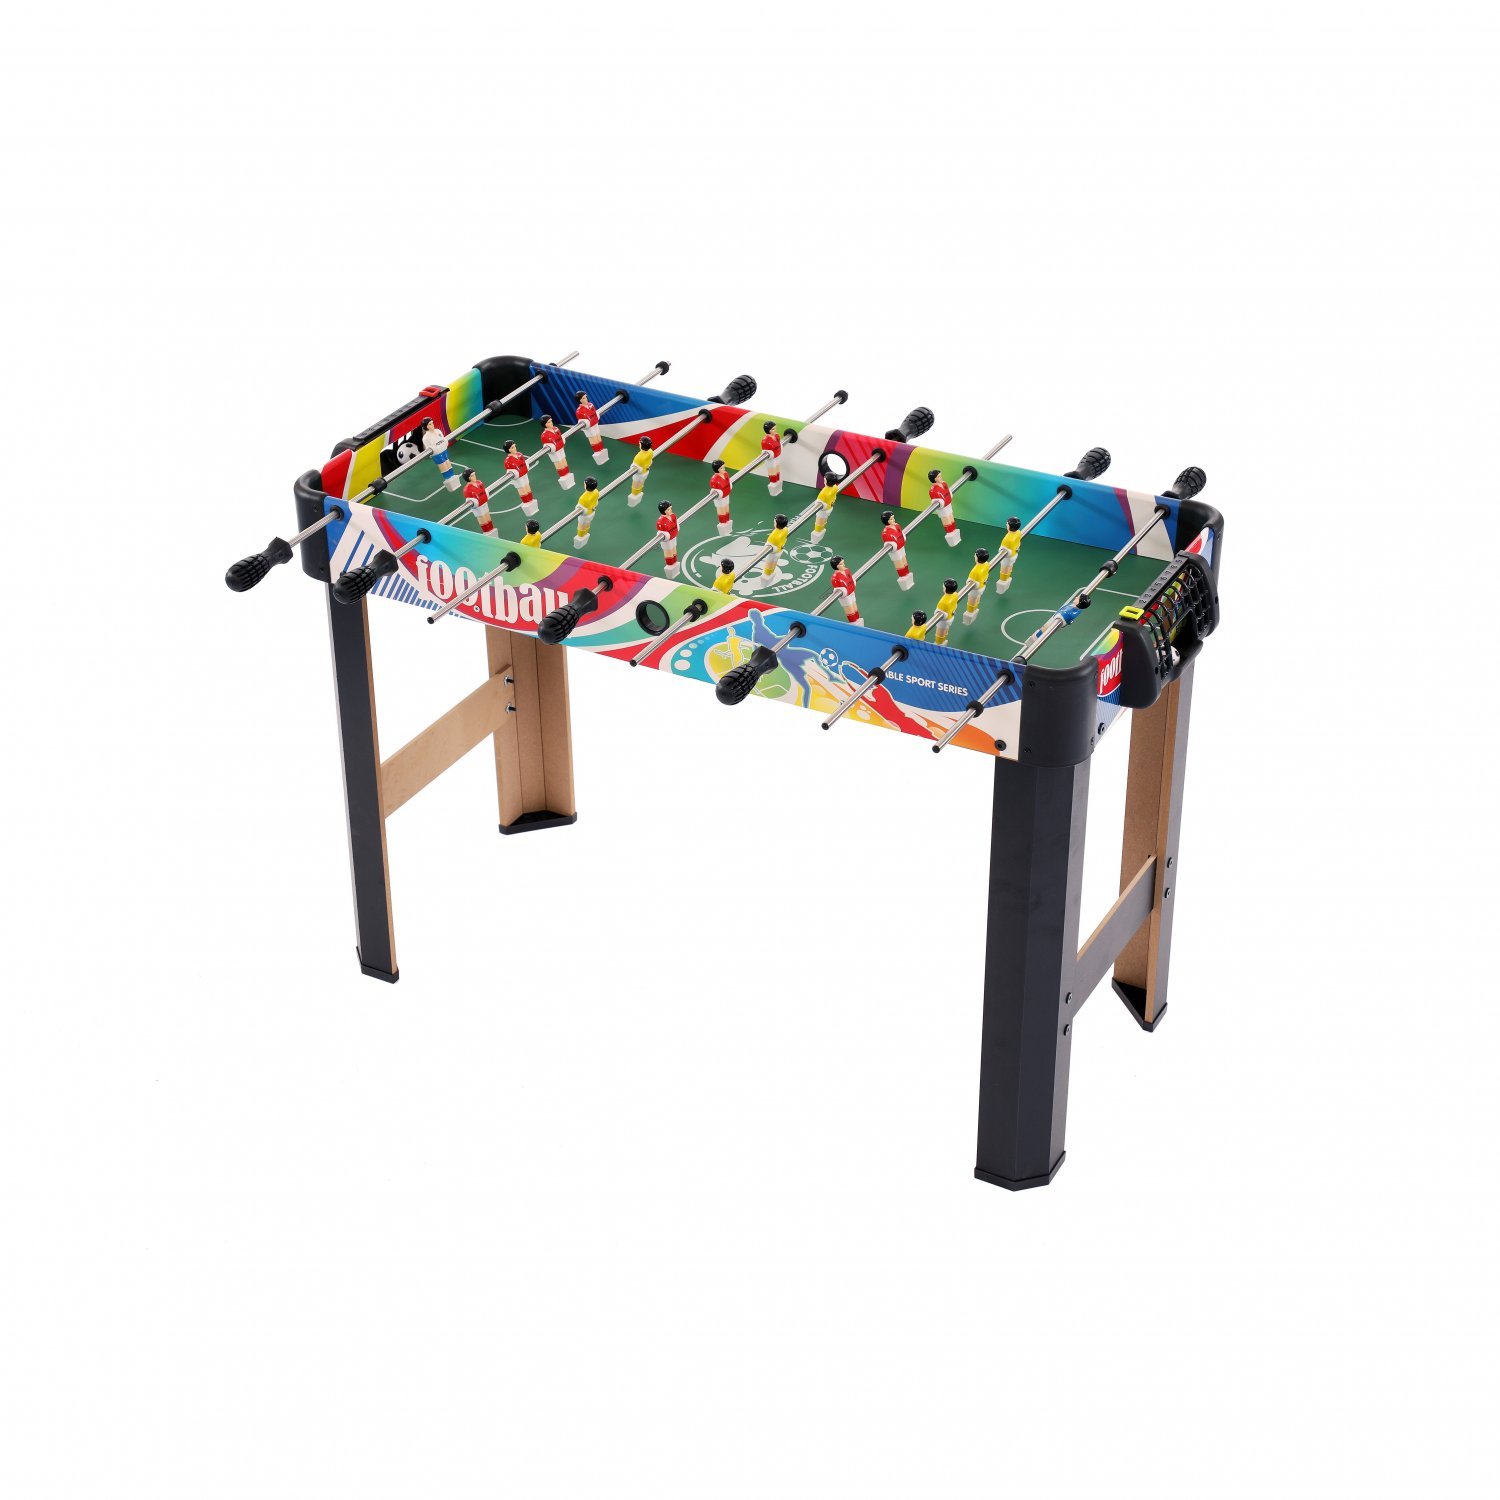 Fun Family Activity Soccer Football Fusball Table Game 37 99 Oypla Stocking The Very Best In Toys Electrical Furniture Homeware Garden Gifts And Much More